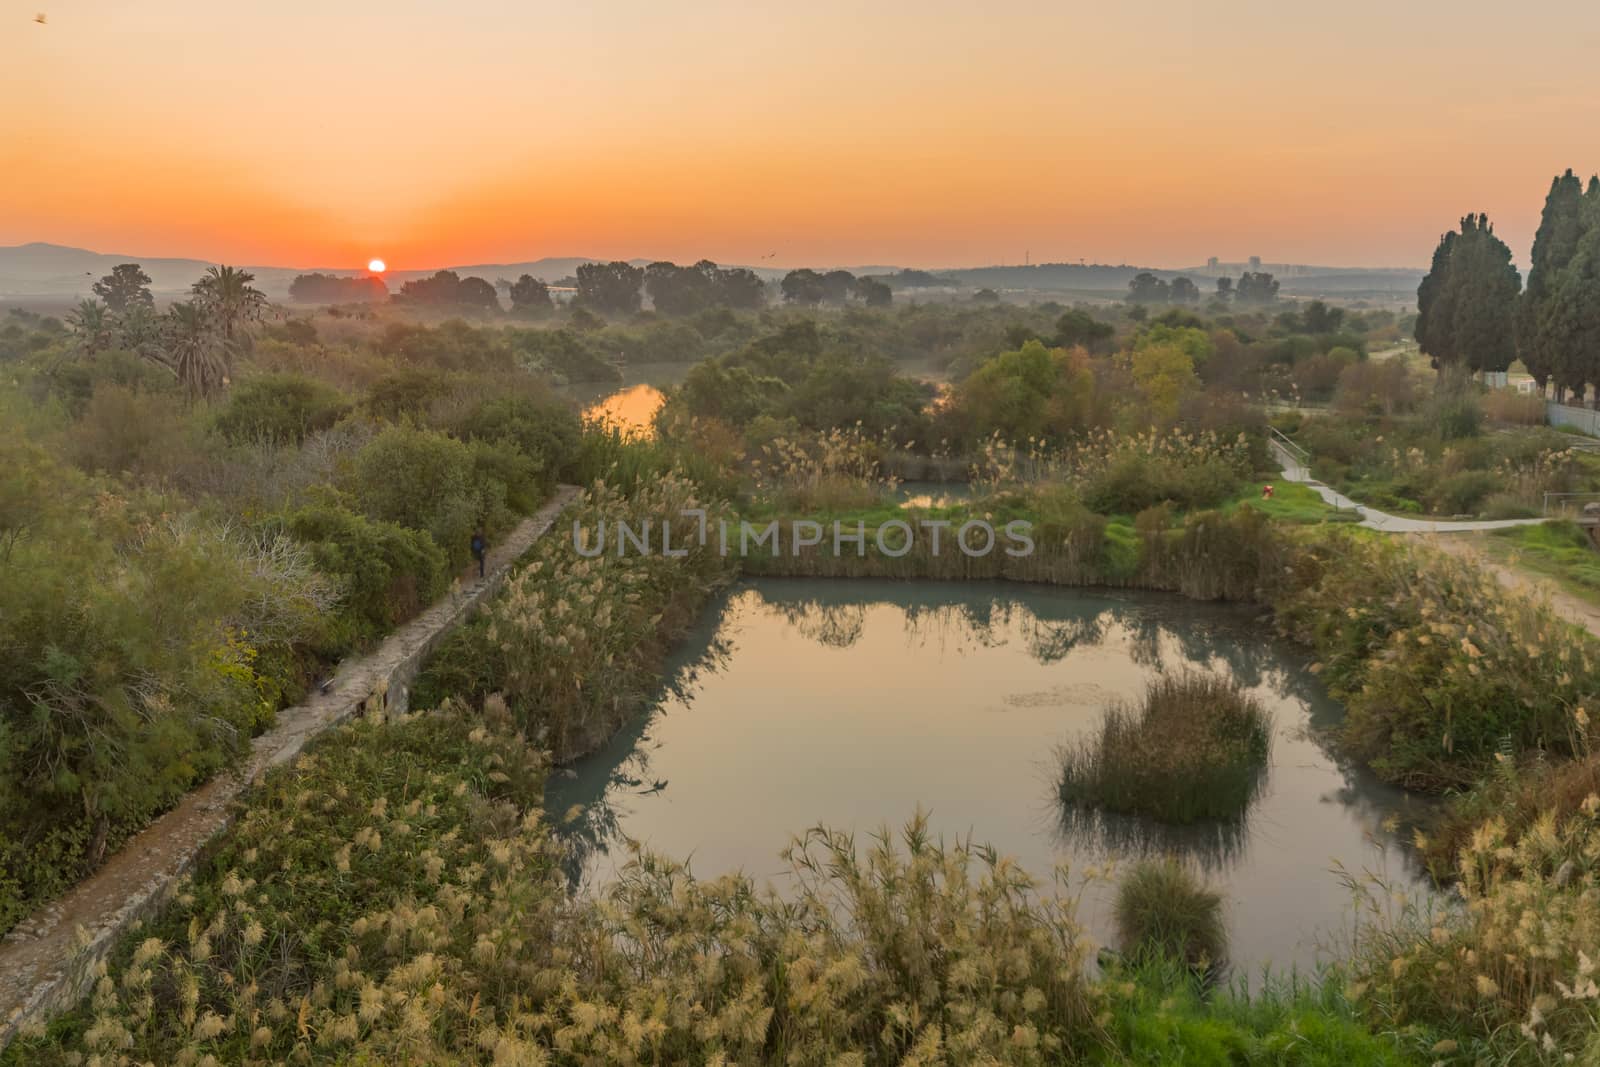 Sunrise view over wetland and ancient canal system, in En Afek nature reserve, northern Israel